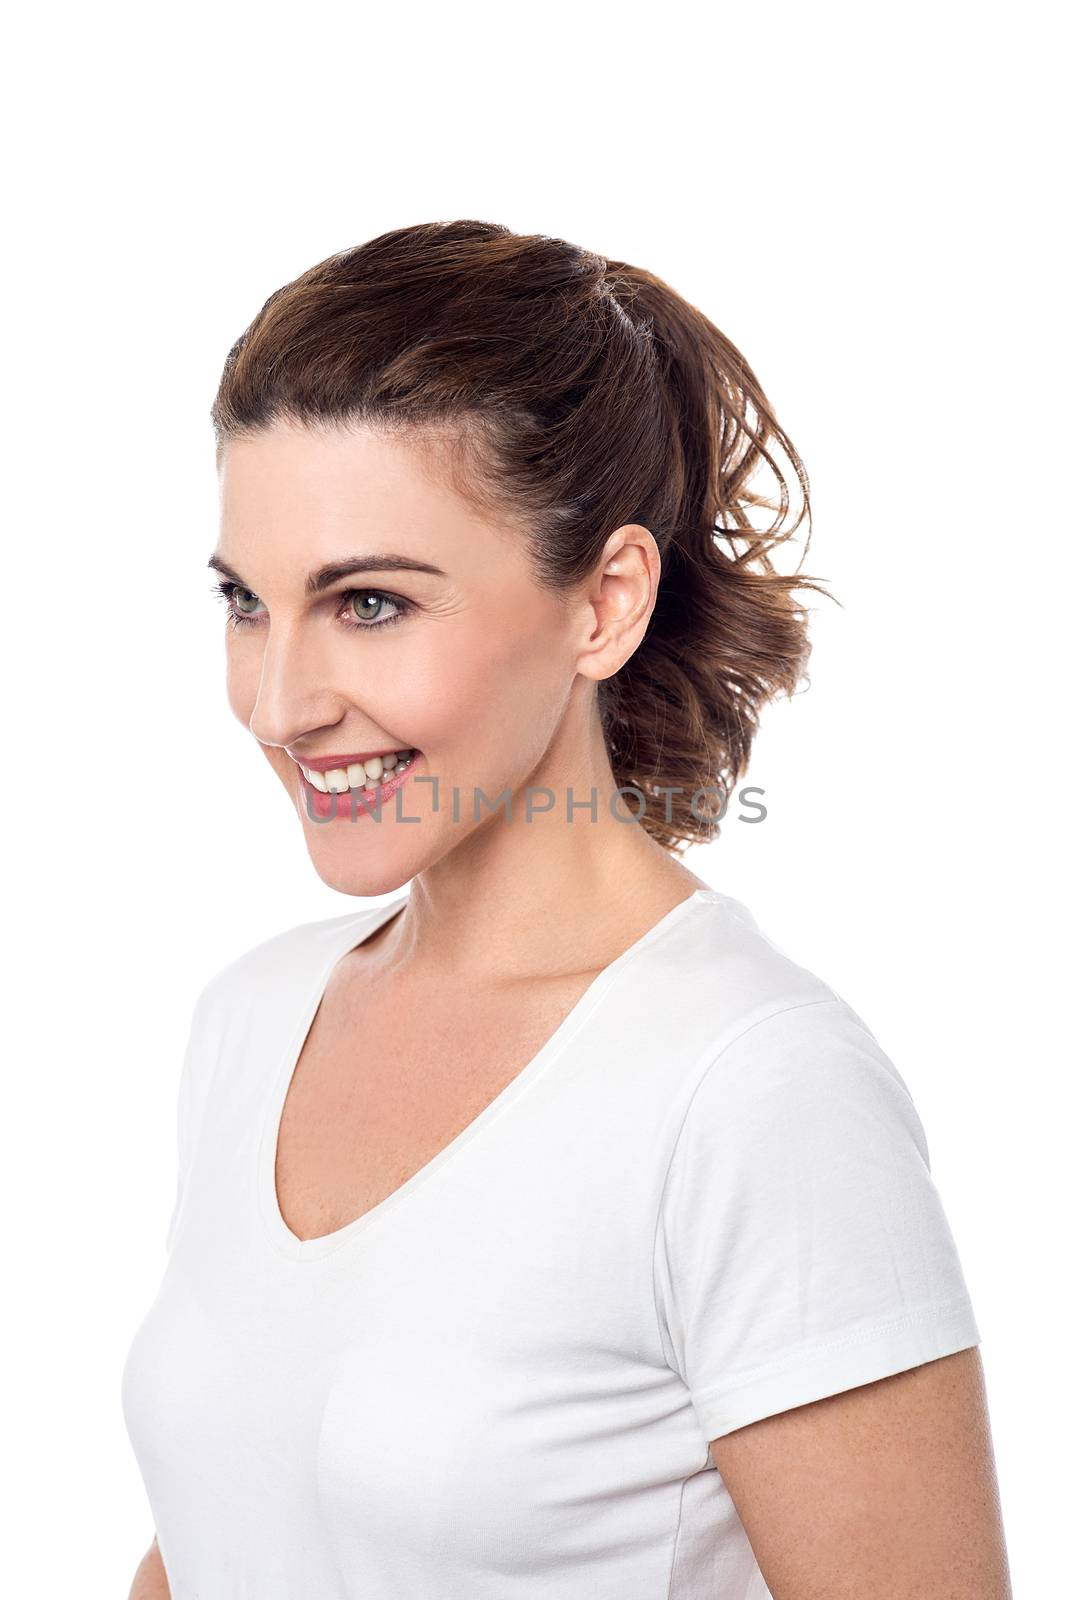 Smiling woman posing sideways.  by stockyimages